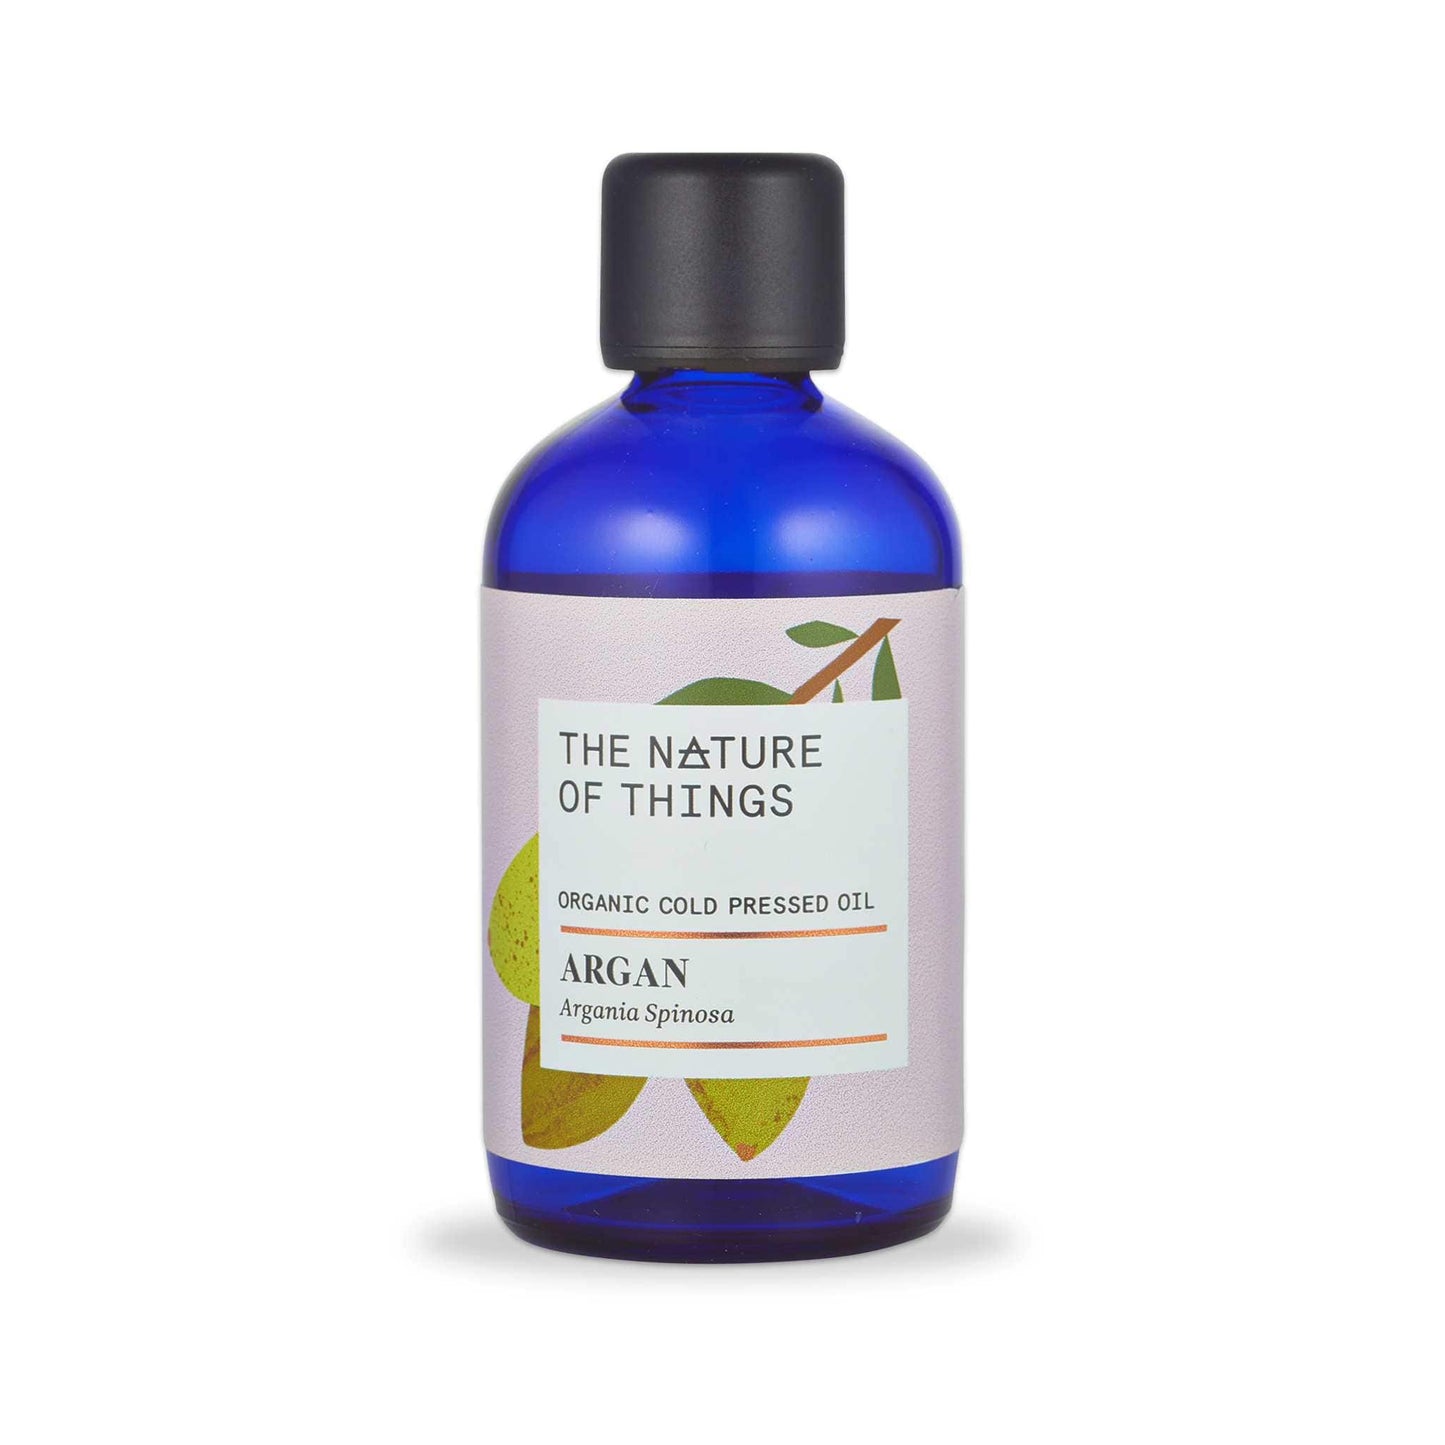 The Nature of Things Essential Oil Argan Oil Organic 100ml - The Nature of Things